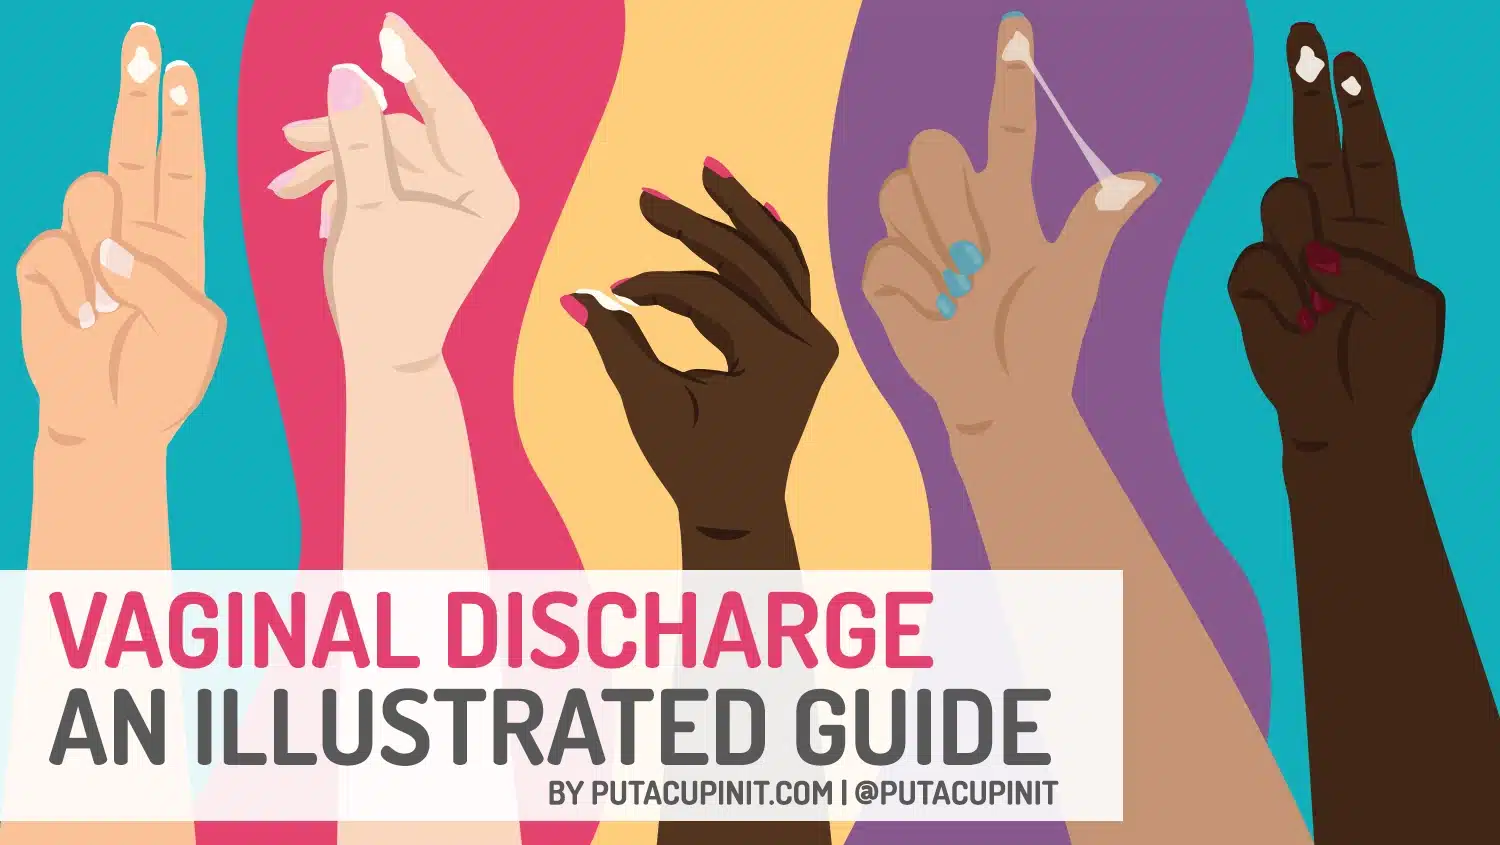 Does Your Hygiene Habits Affect Vaginal Discharge? Here's What Doctors Said